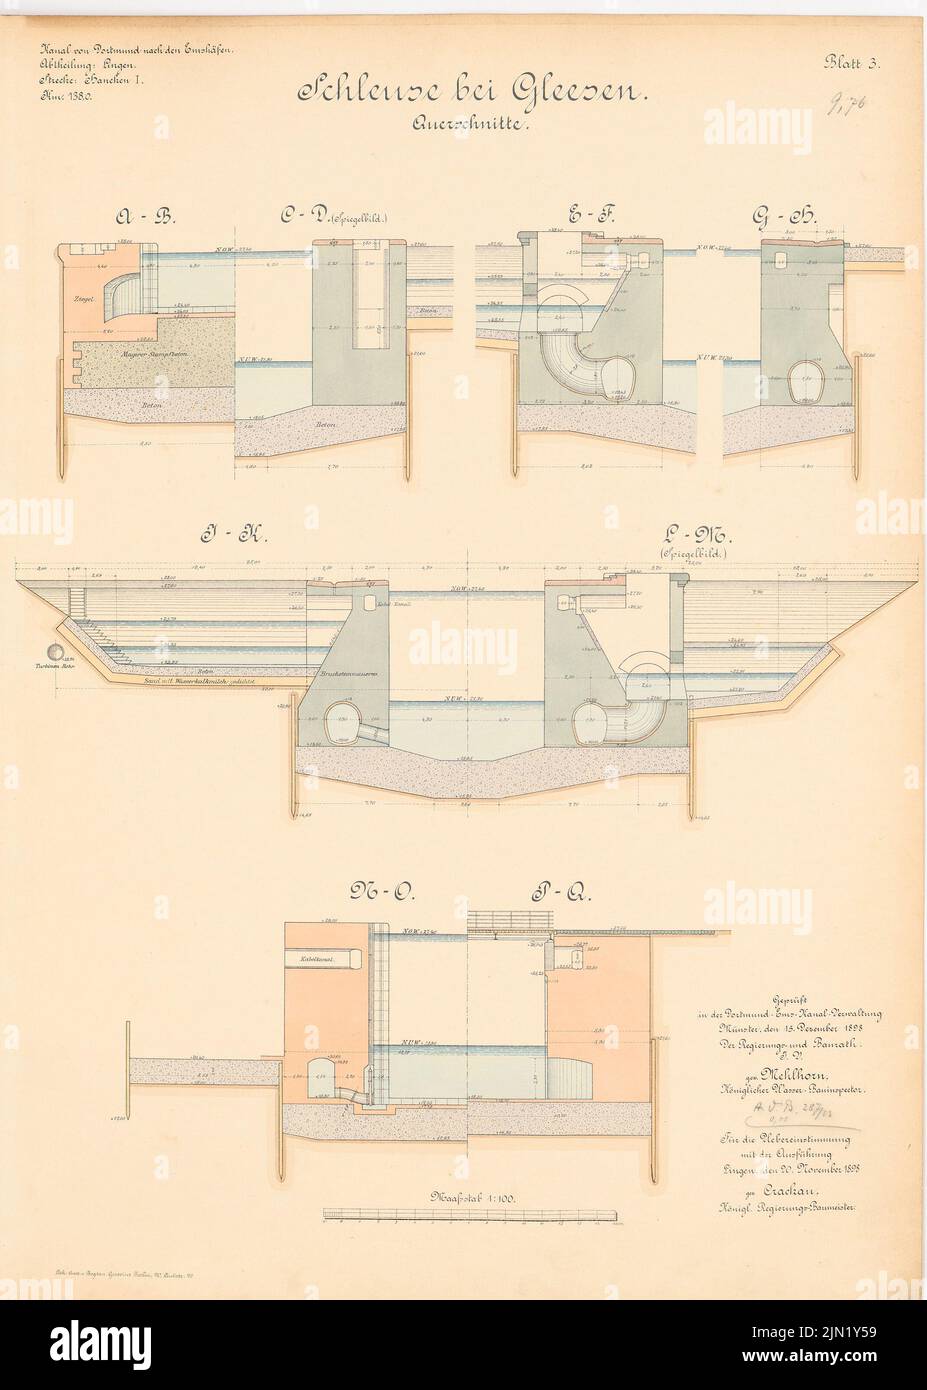 N.N., Dortmund-Ems-Canal. Schleuse, Gleesen: cross -sections 1: 100. Lithograph colored on paper, 70.4 x 50.2 cm (including scan edges) N.N. : Dortmund-Ems-Kanal. Schleuse, Gleesen Stock Photo